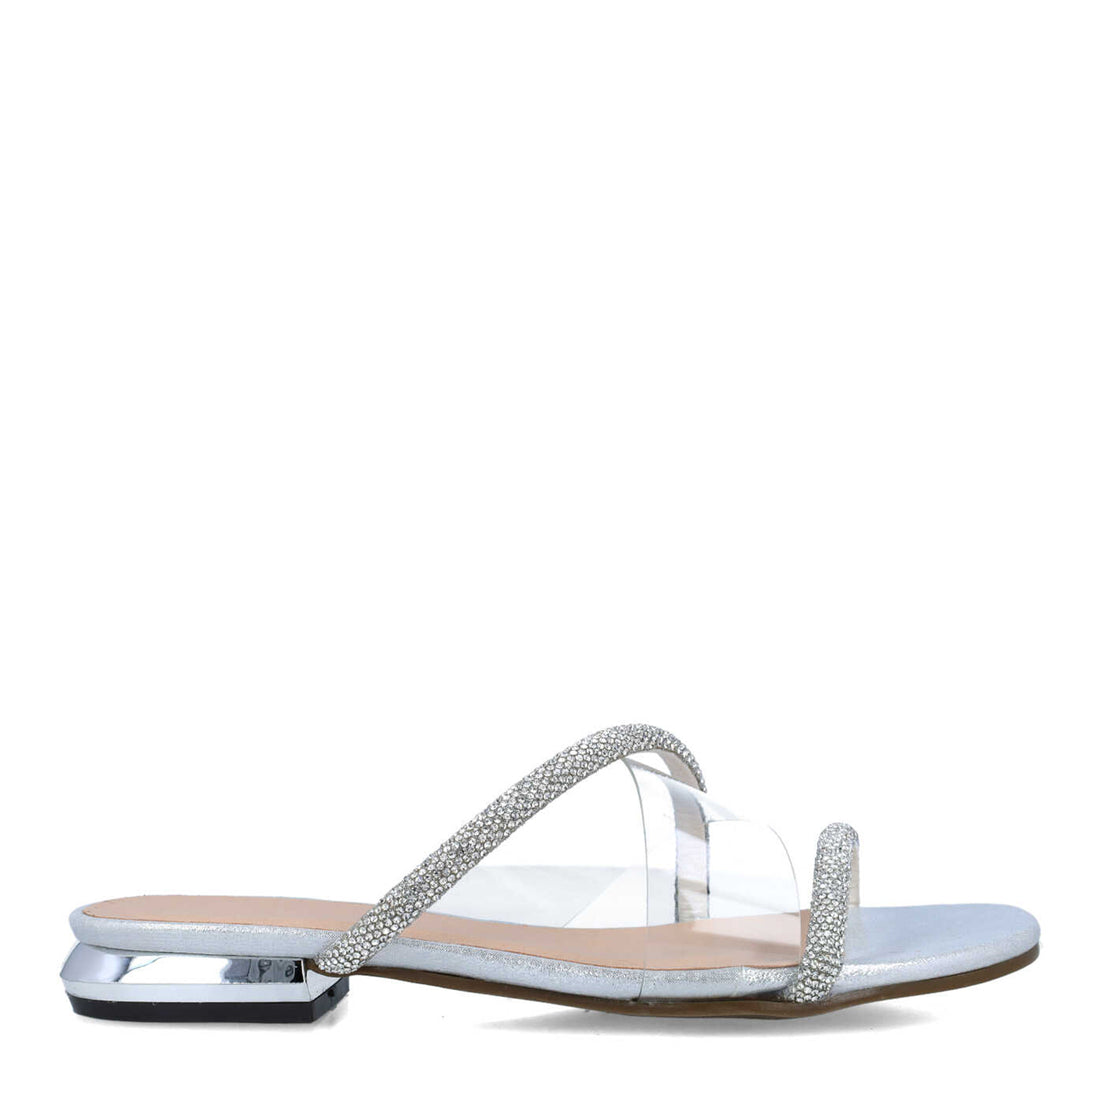 Silver Slippers With Embellished Straps